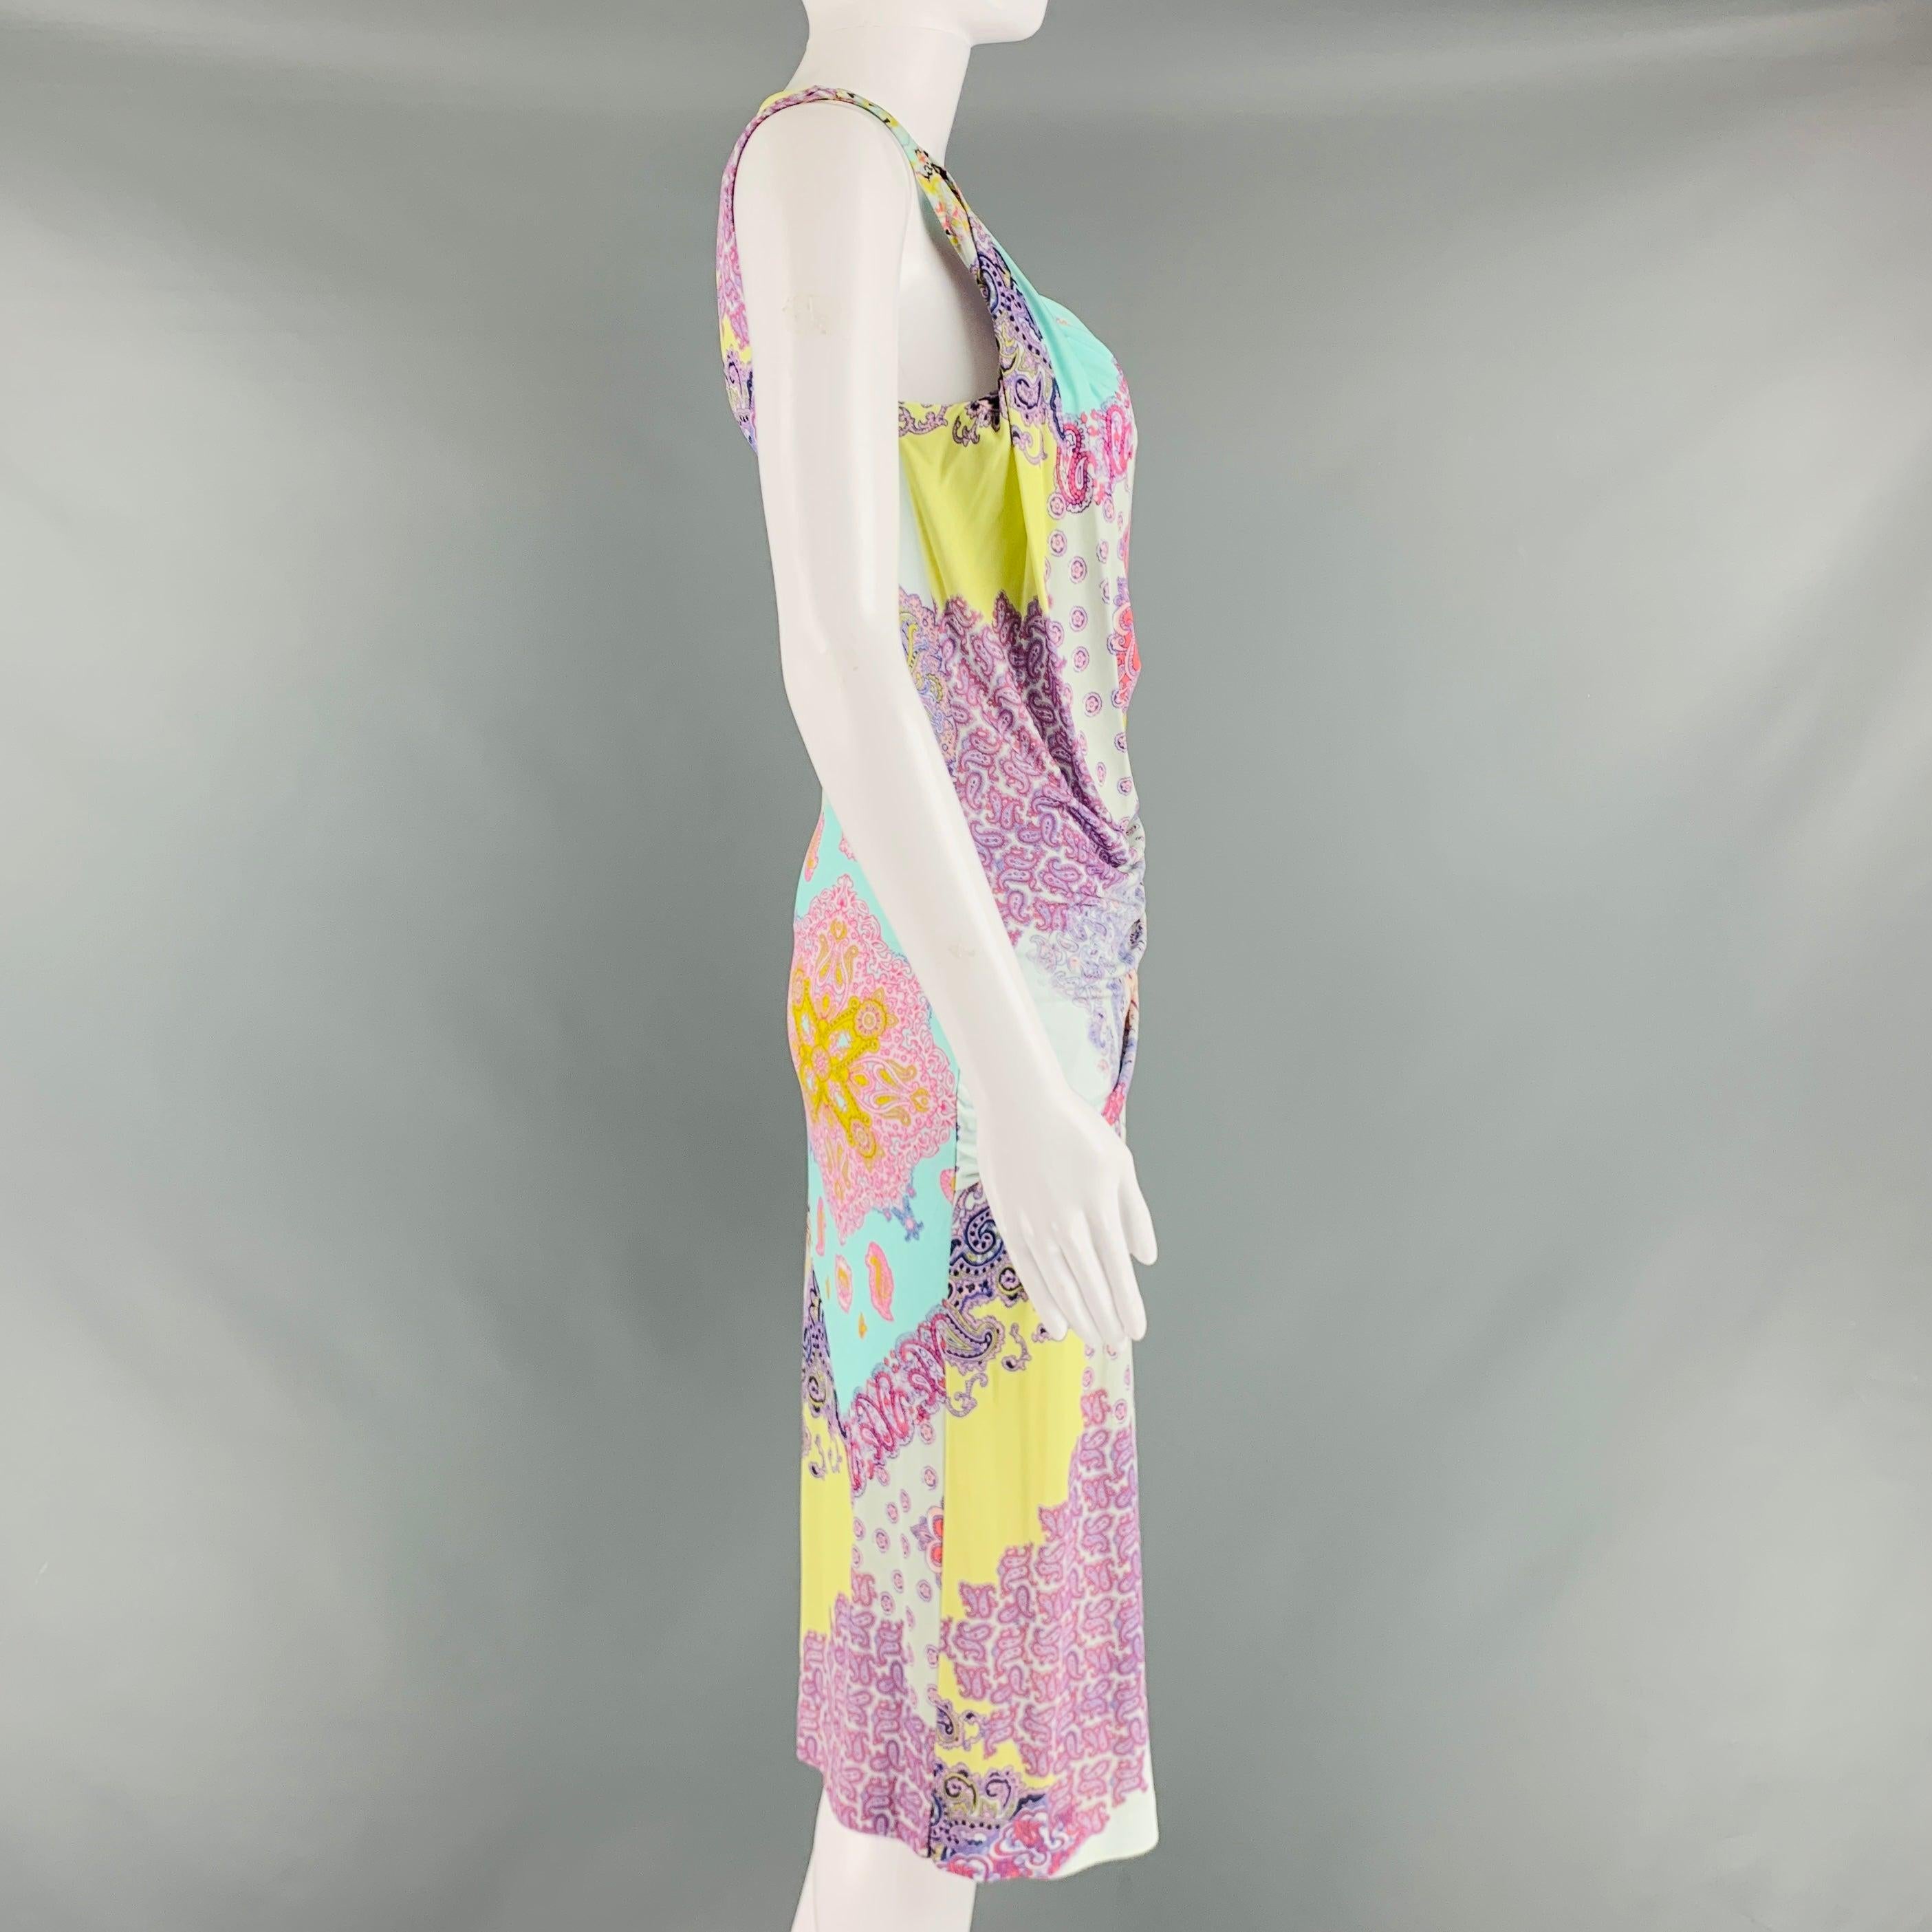 ETRO mid length dress comes in a multi-color and lilac viscose knit featuring a sleeveless style, and draped details. Made in Italy.Excellent Pre-Owned Condition. 

Marked:   42 

Measurements: 
 
Shoulder: 12 inches Bust: 32 inches Waist: 29 inches